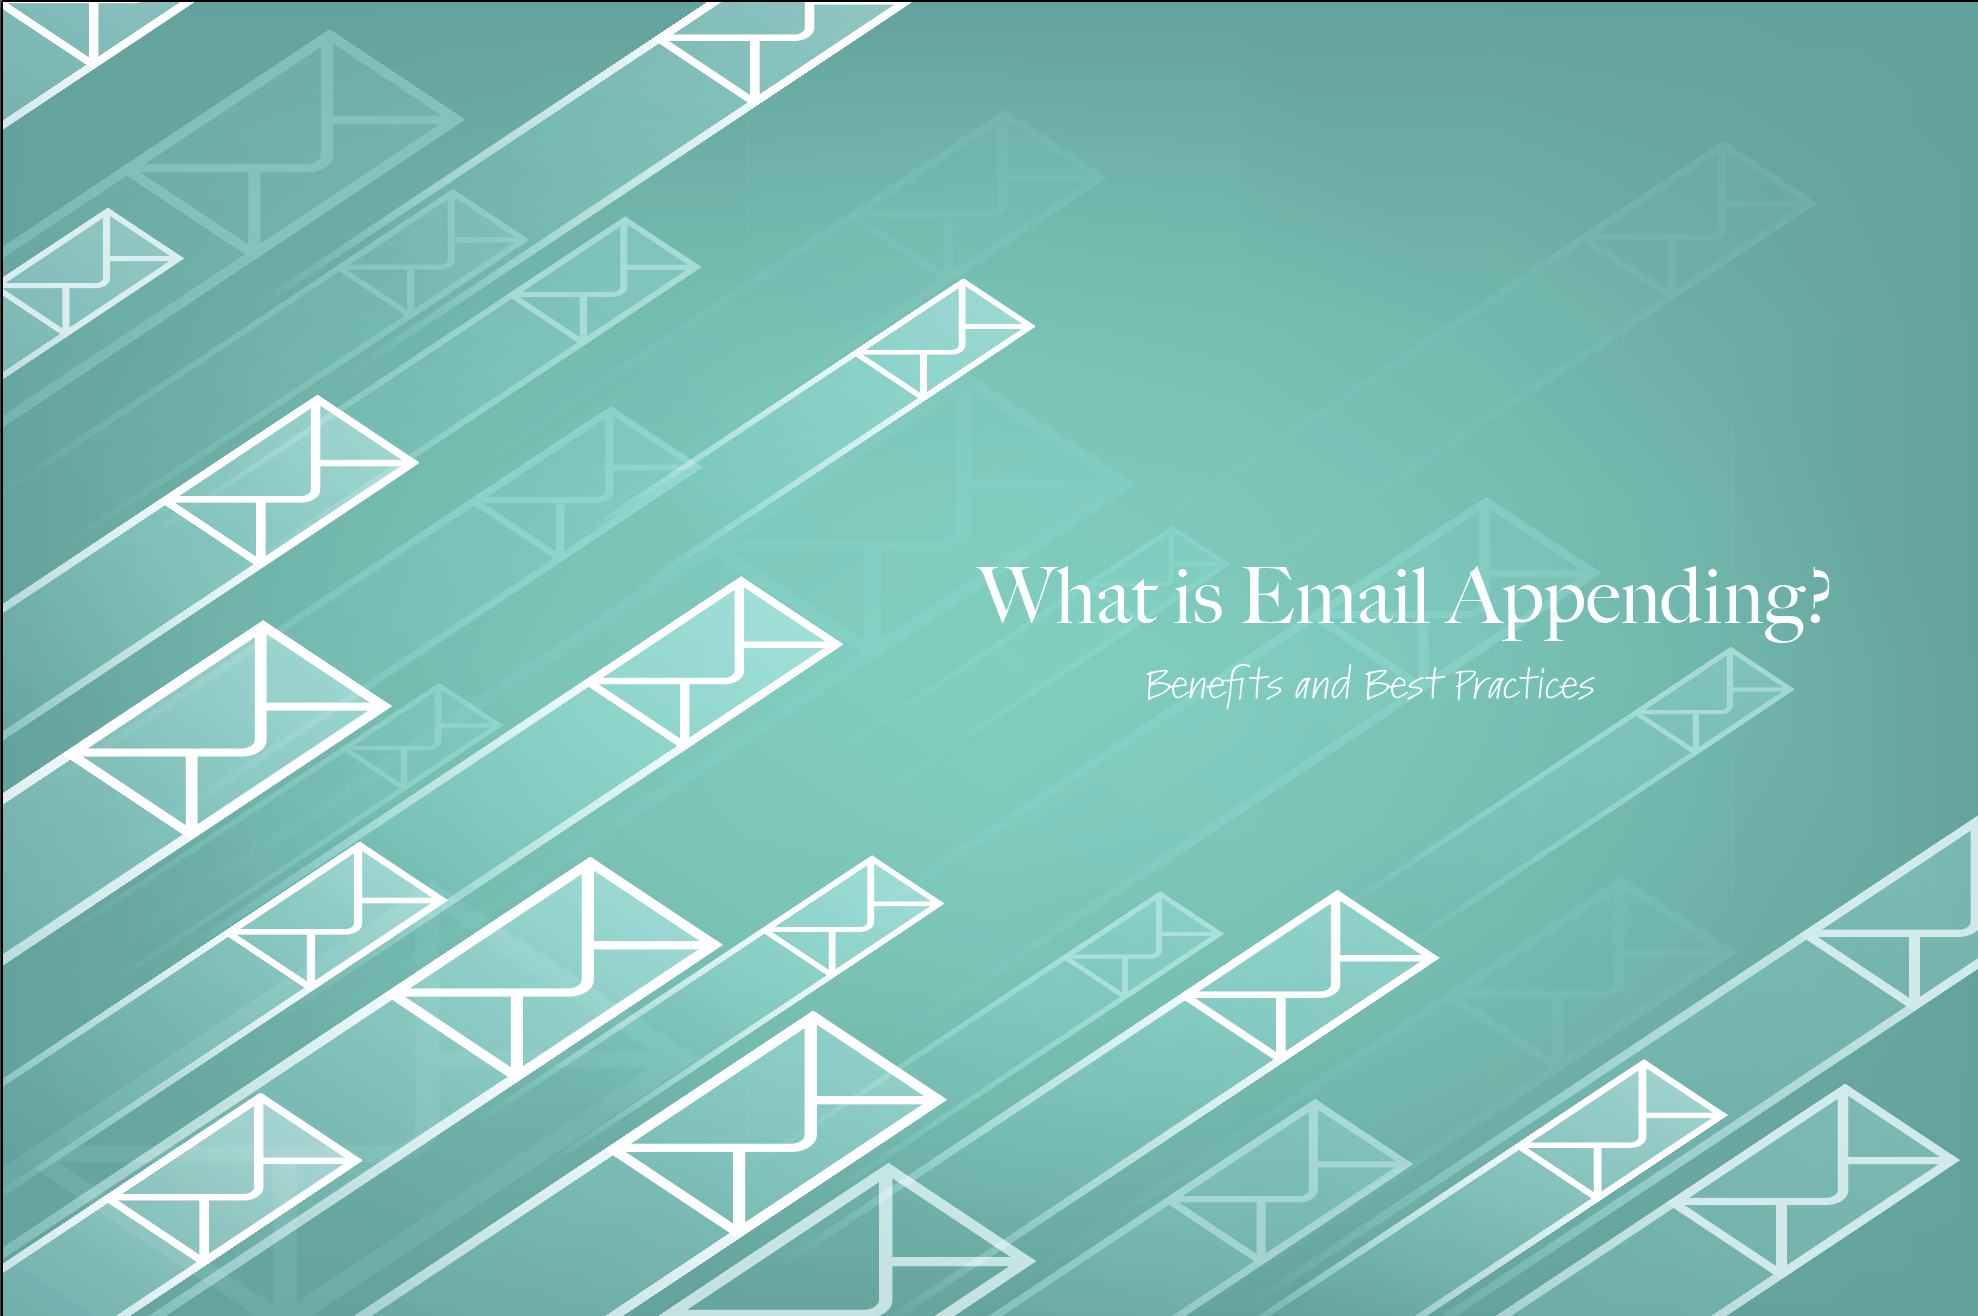 What is Email Appending?